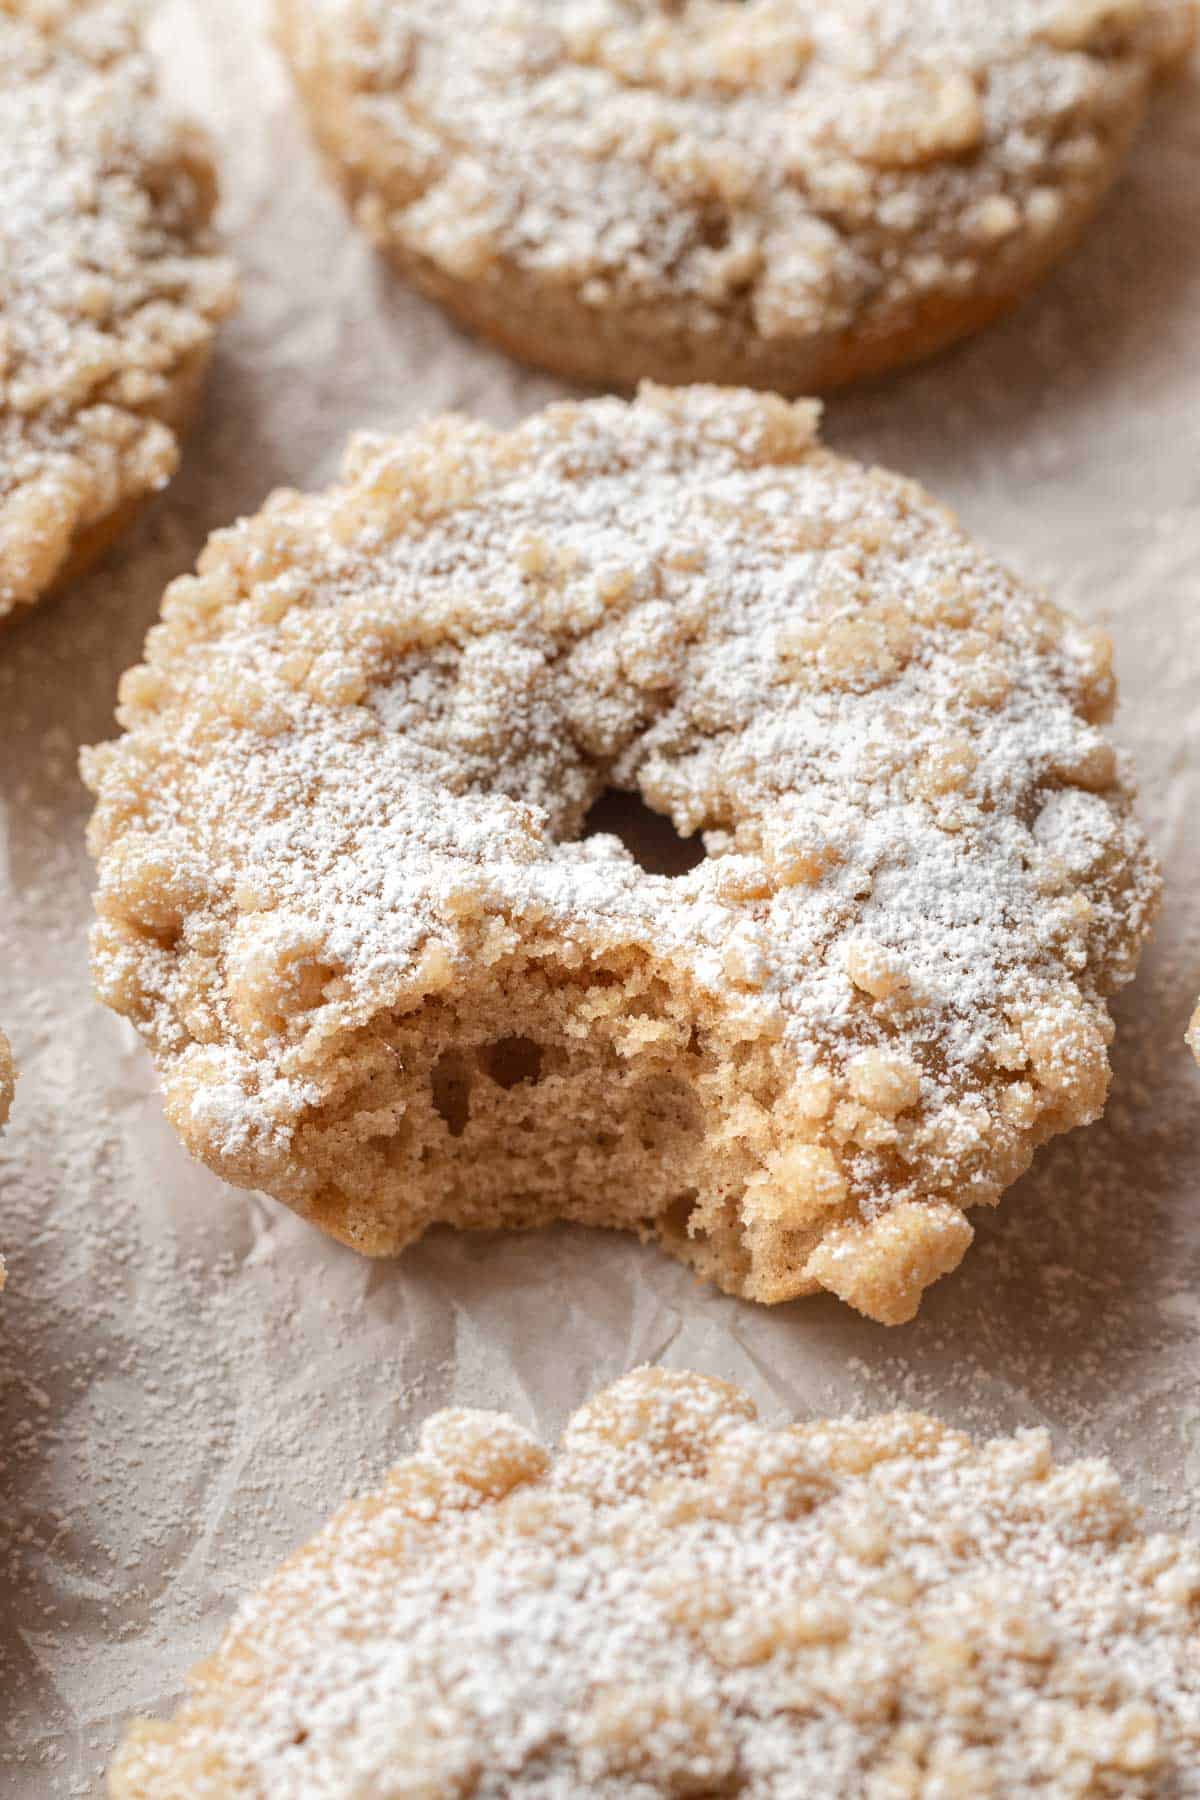 Close up image of a crumb donut resting on a baking sheet and topped with powder sugar.